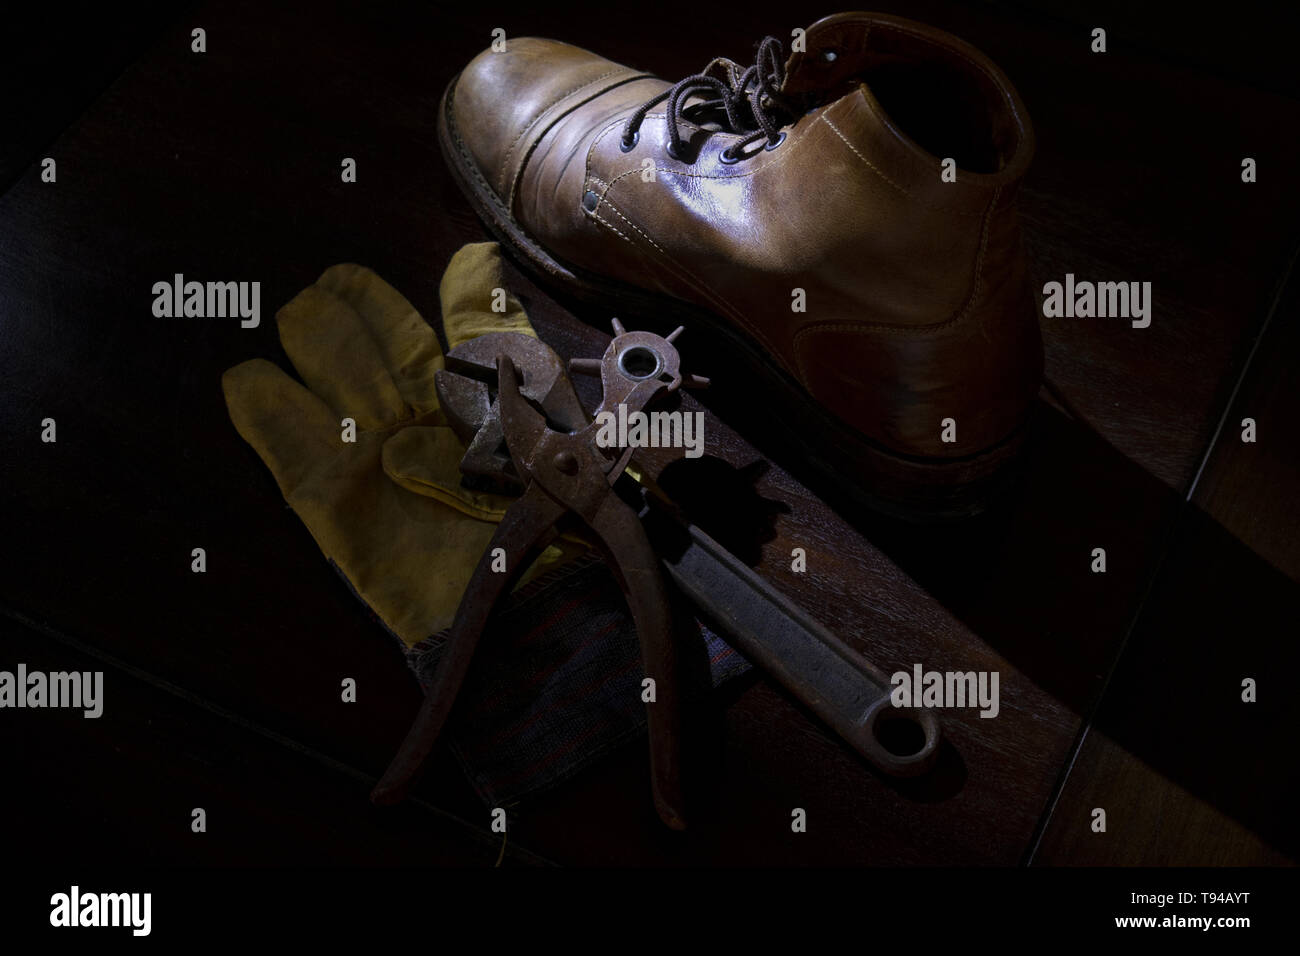 tools of metalworker work photographed in still life Stock Photo